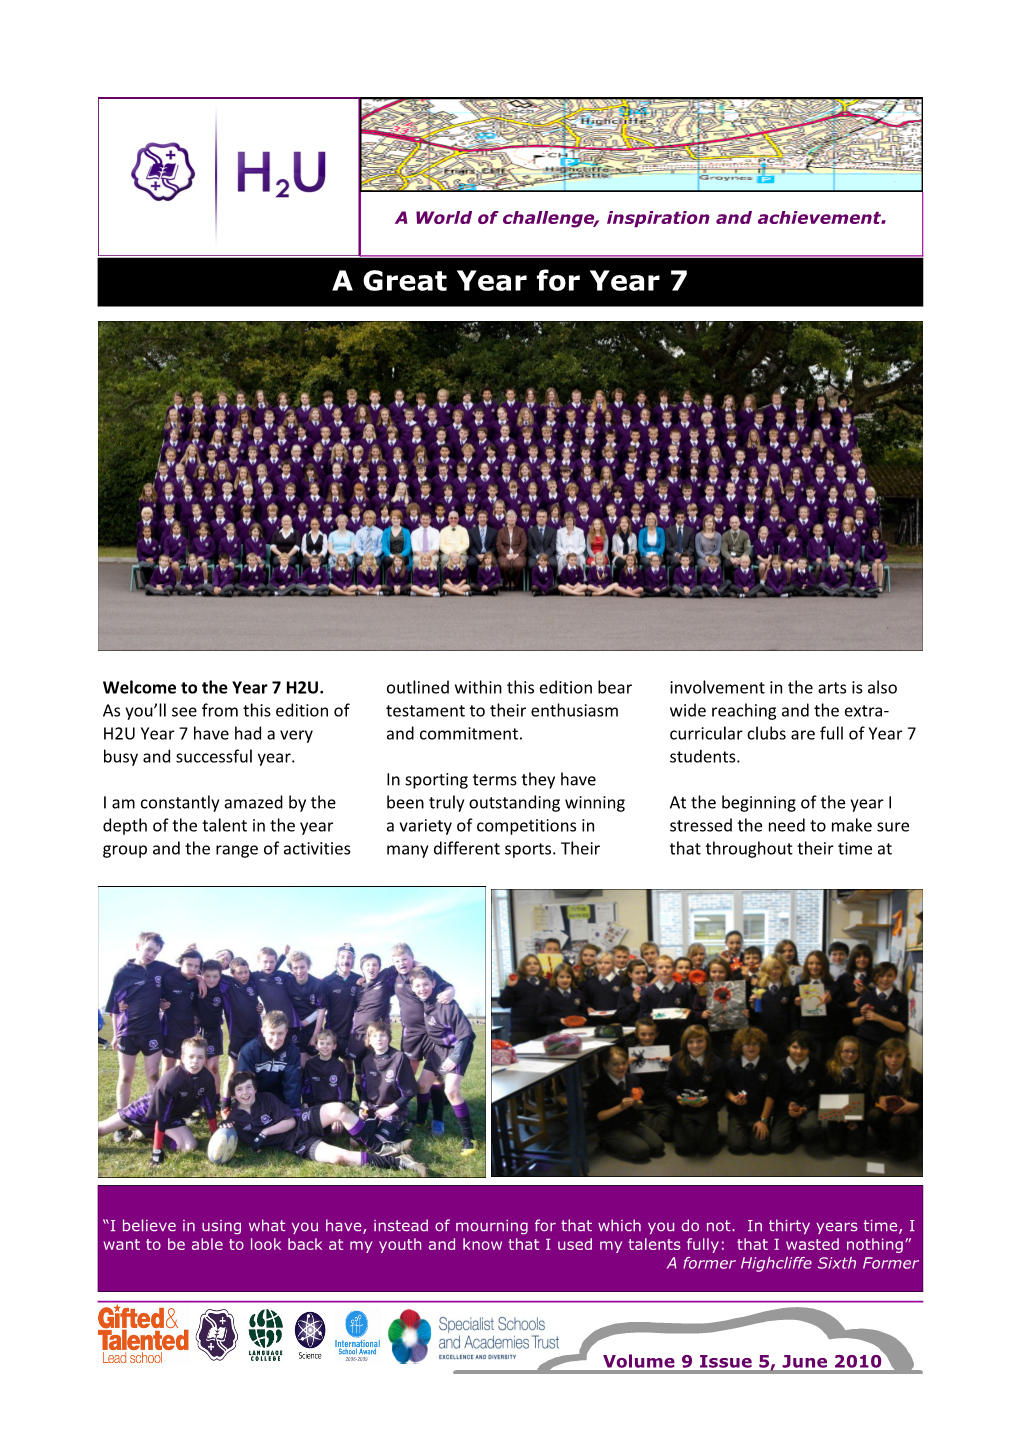 A Great Year for Year 7